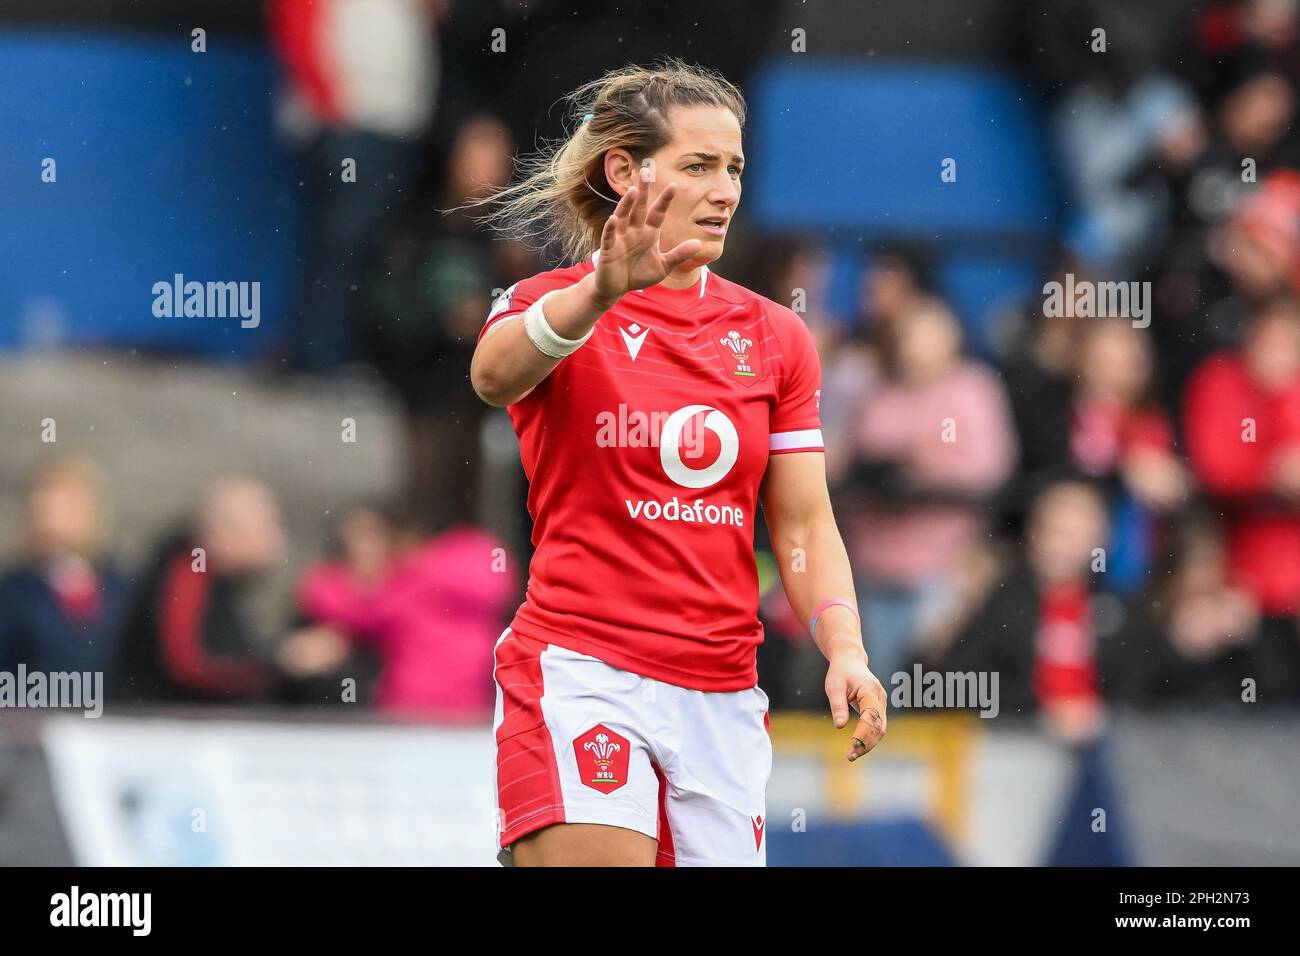 Kerin Lake of Wales during the TikTok Women’s Six Nations match Wales vs Ireland at BT Cardiff Arms Park, Cardiff, United Kingdom, 25th March 2023  (Photo by Craig Thomas/News Images) Stock Photo